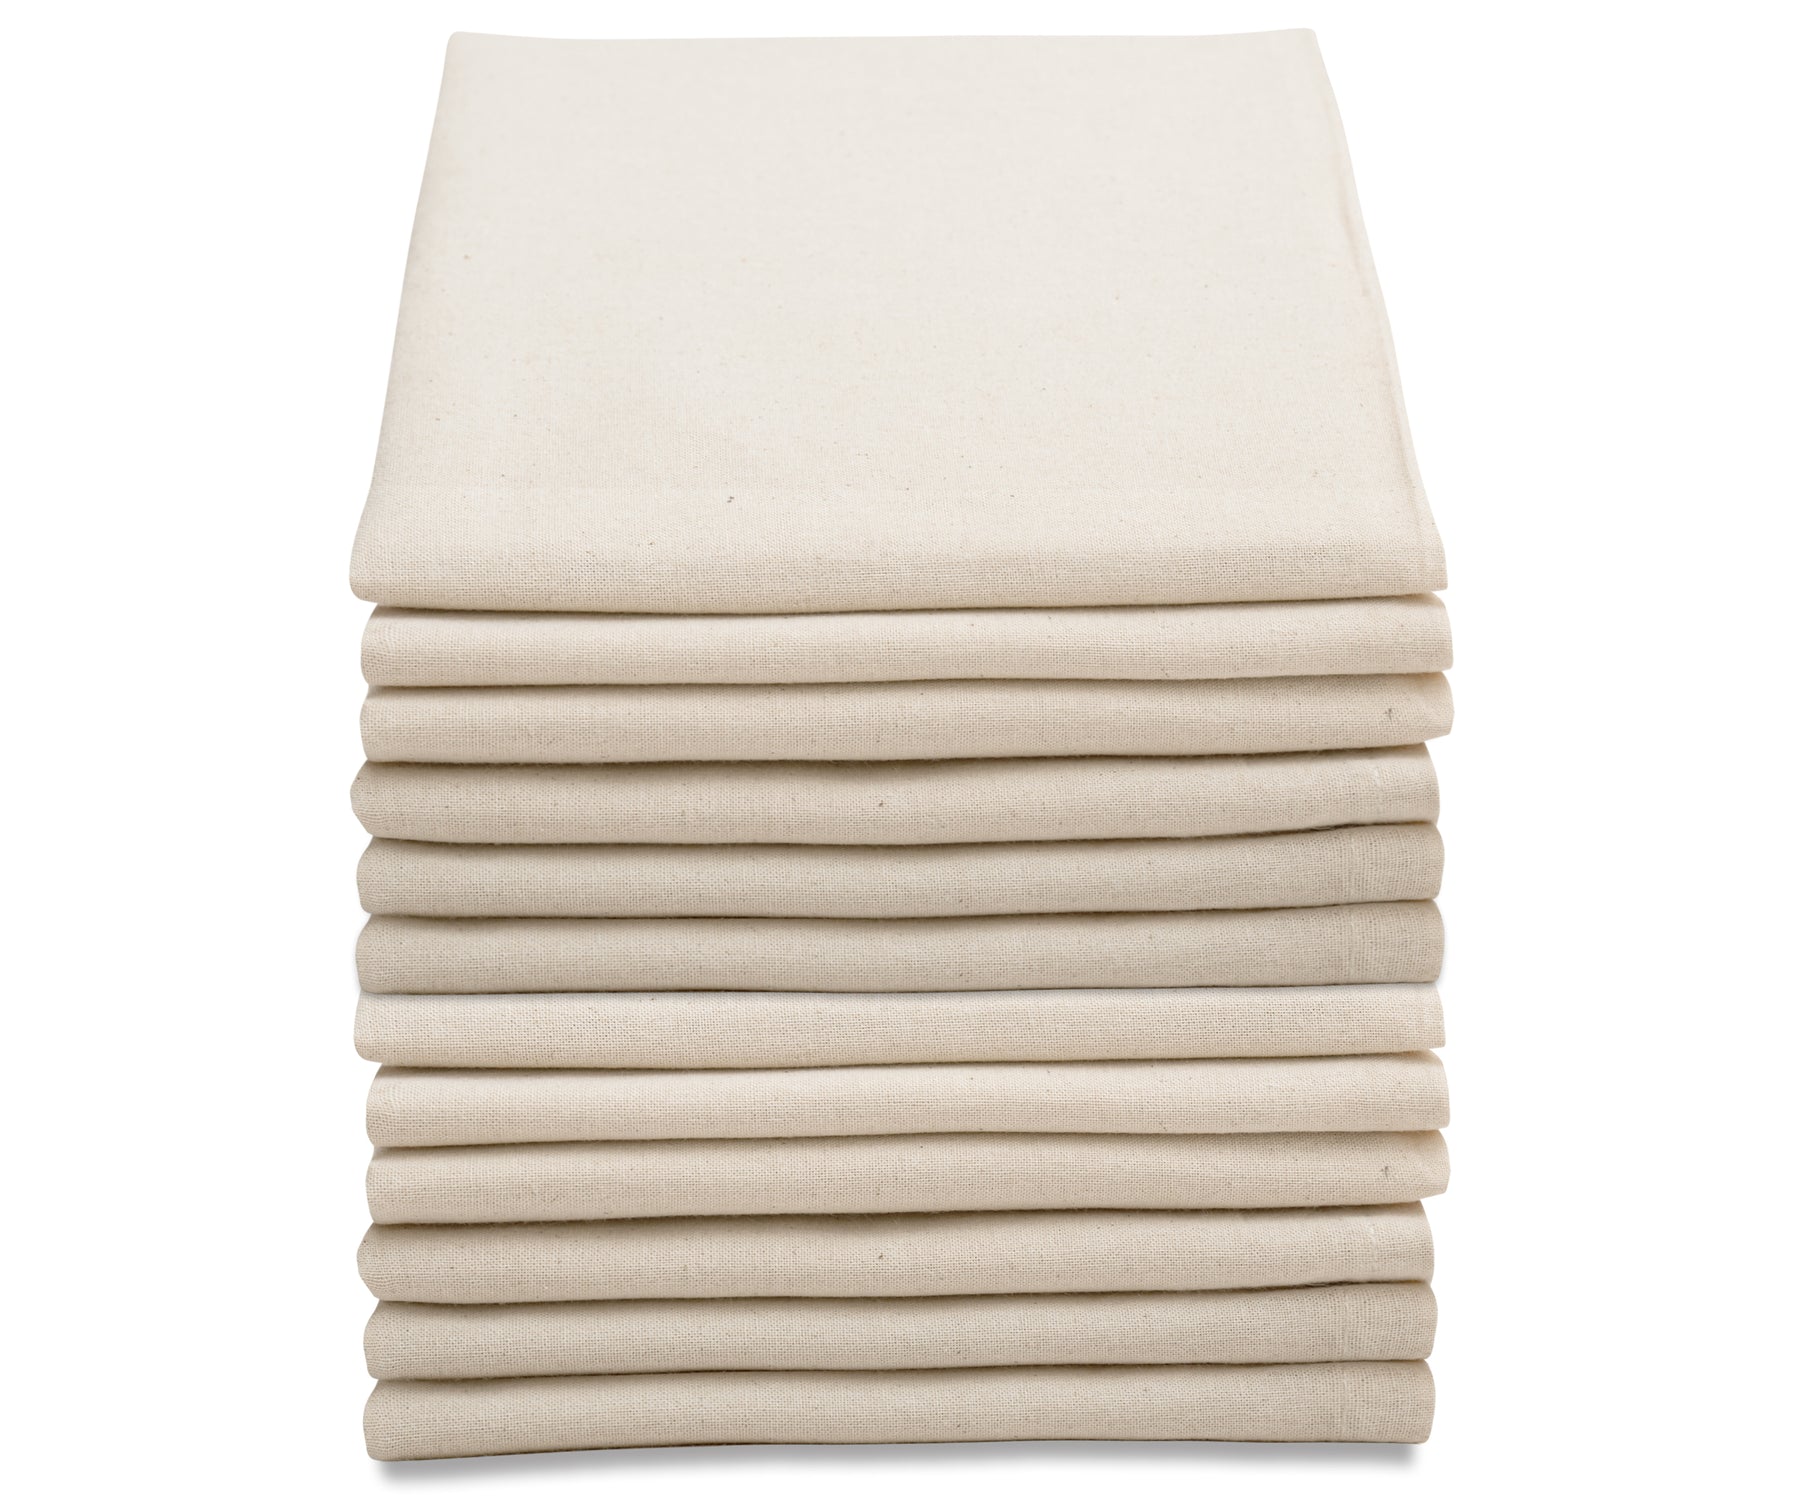 drying dish towels or flour sack towel are made with cotton fabric, best kitchen towels for drying dishes.